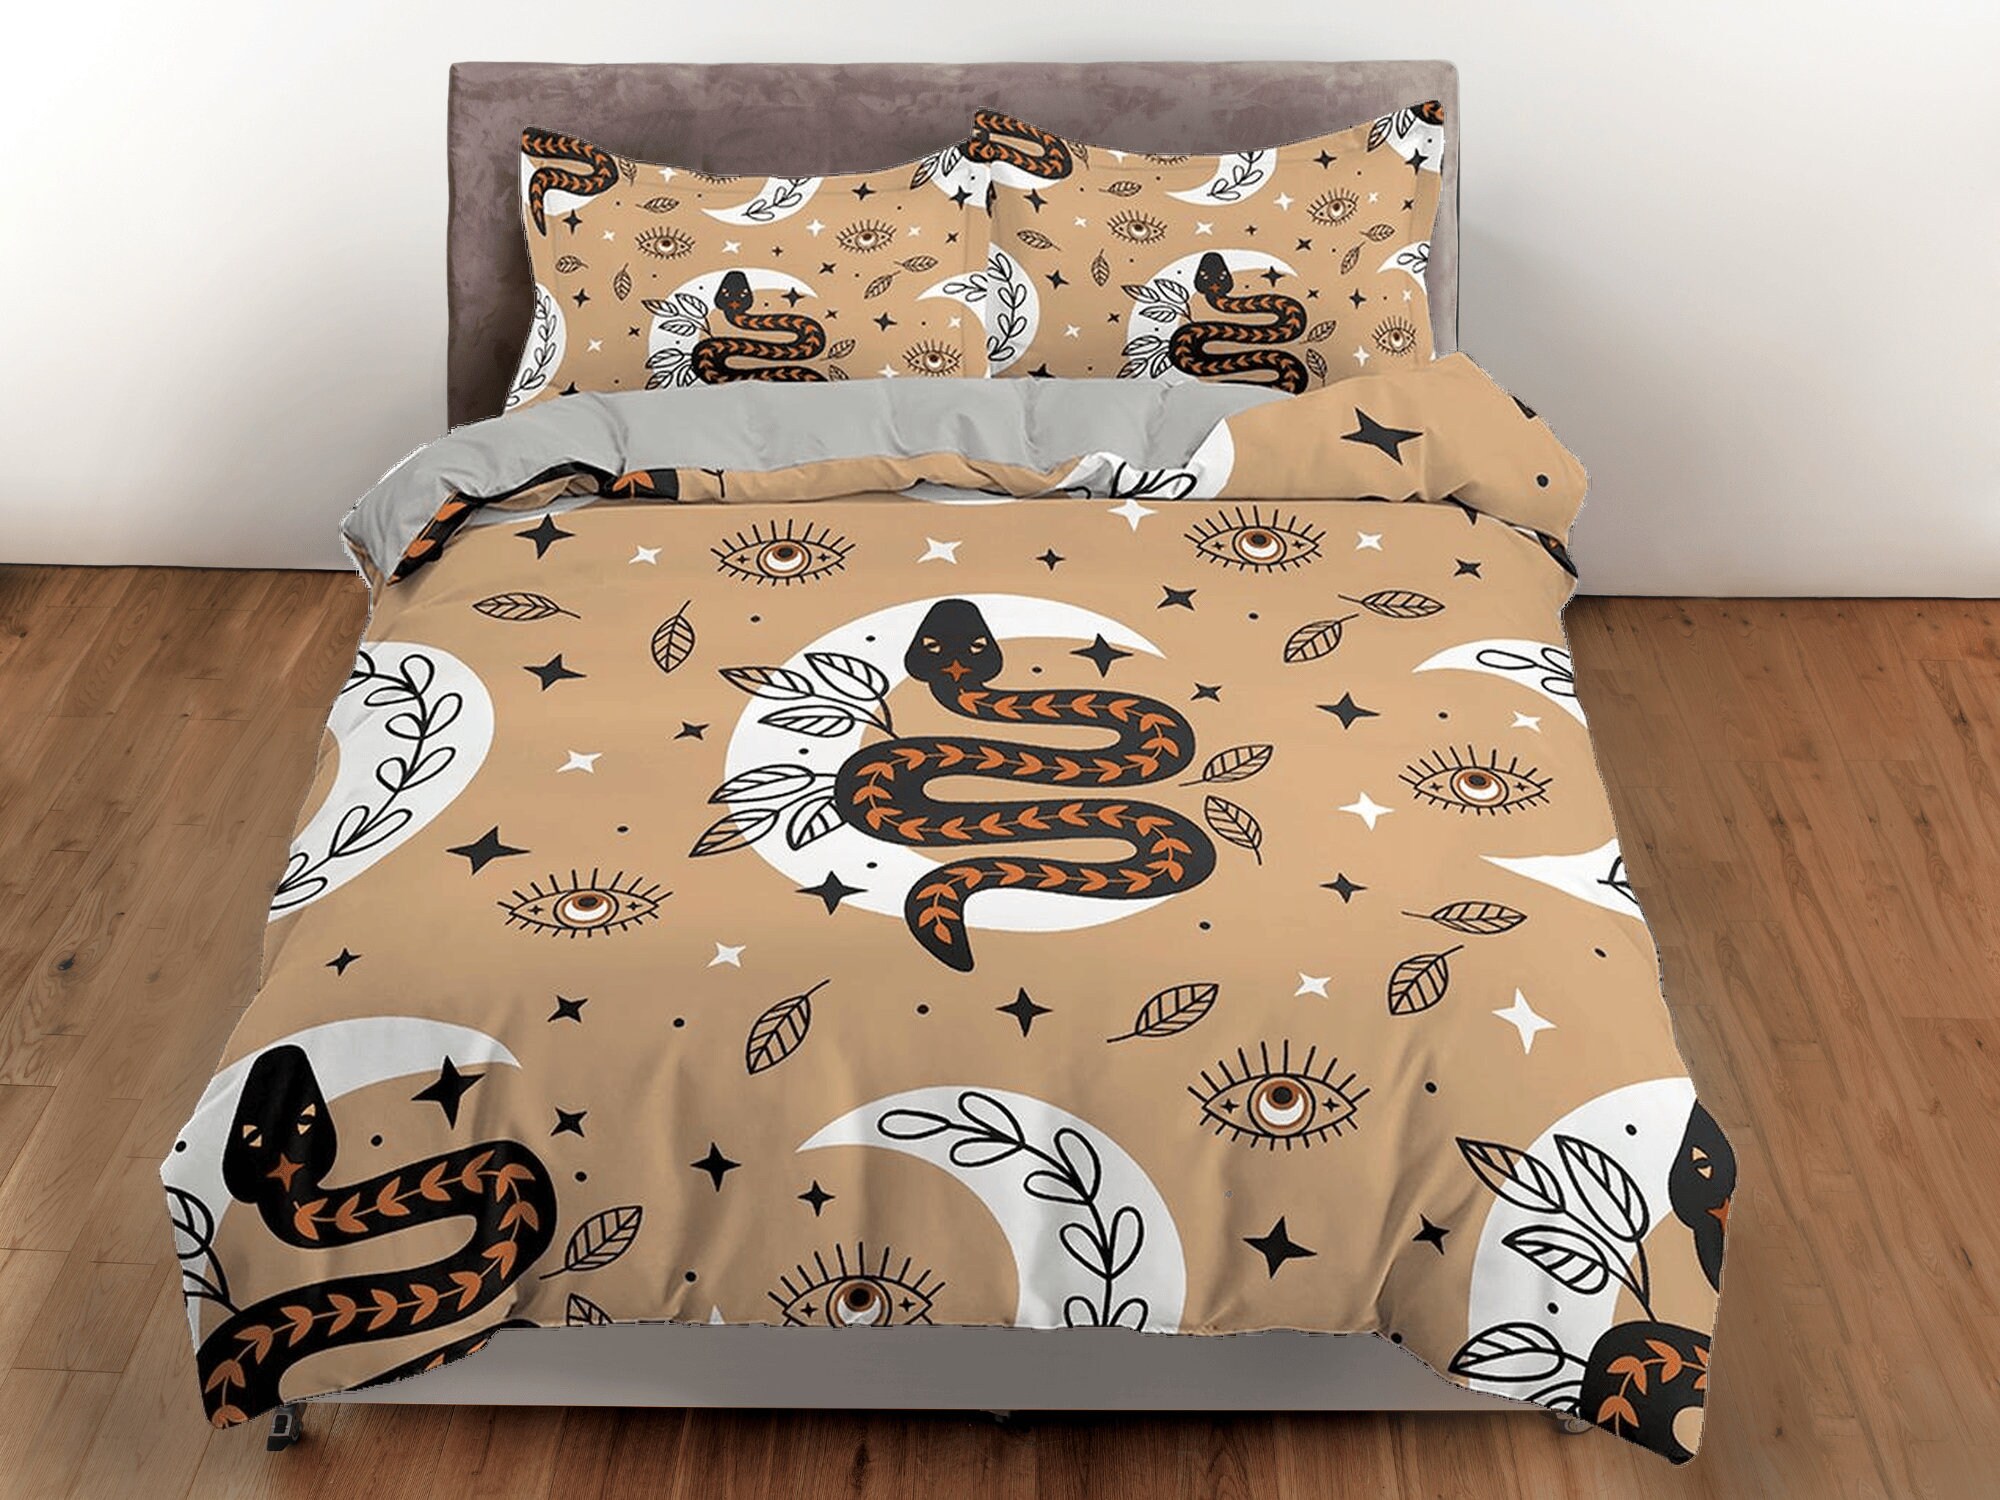 Green Snake New Products Bedding Duvet Cover 3D Digital Printing Bed Sheet  Fashion Design 2-3Piece Quilt Cover Bedding Set